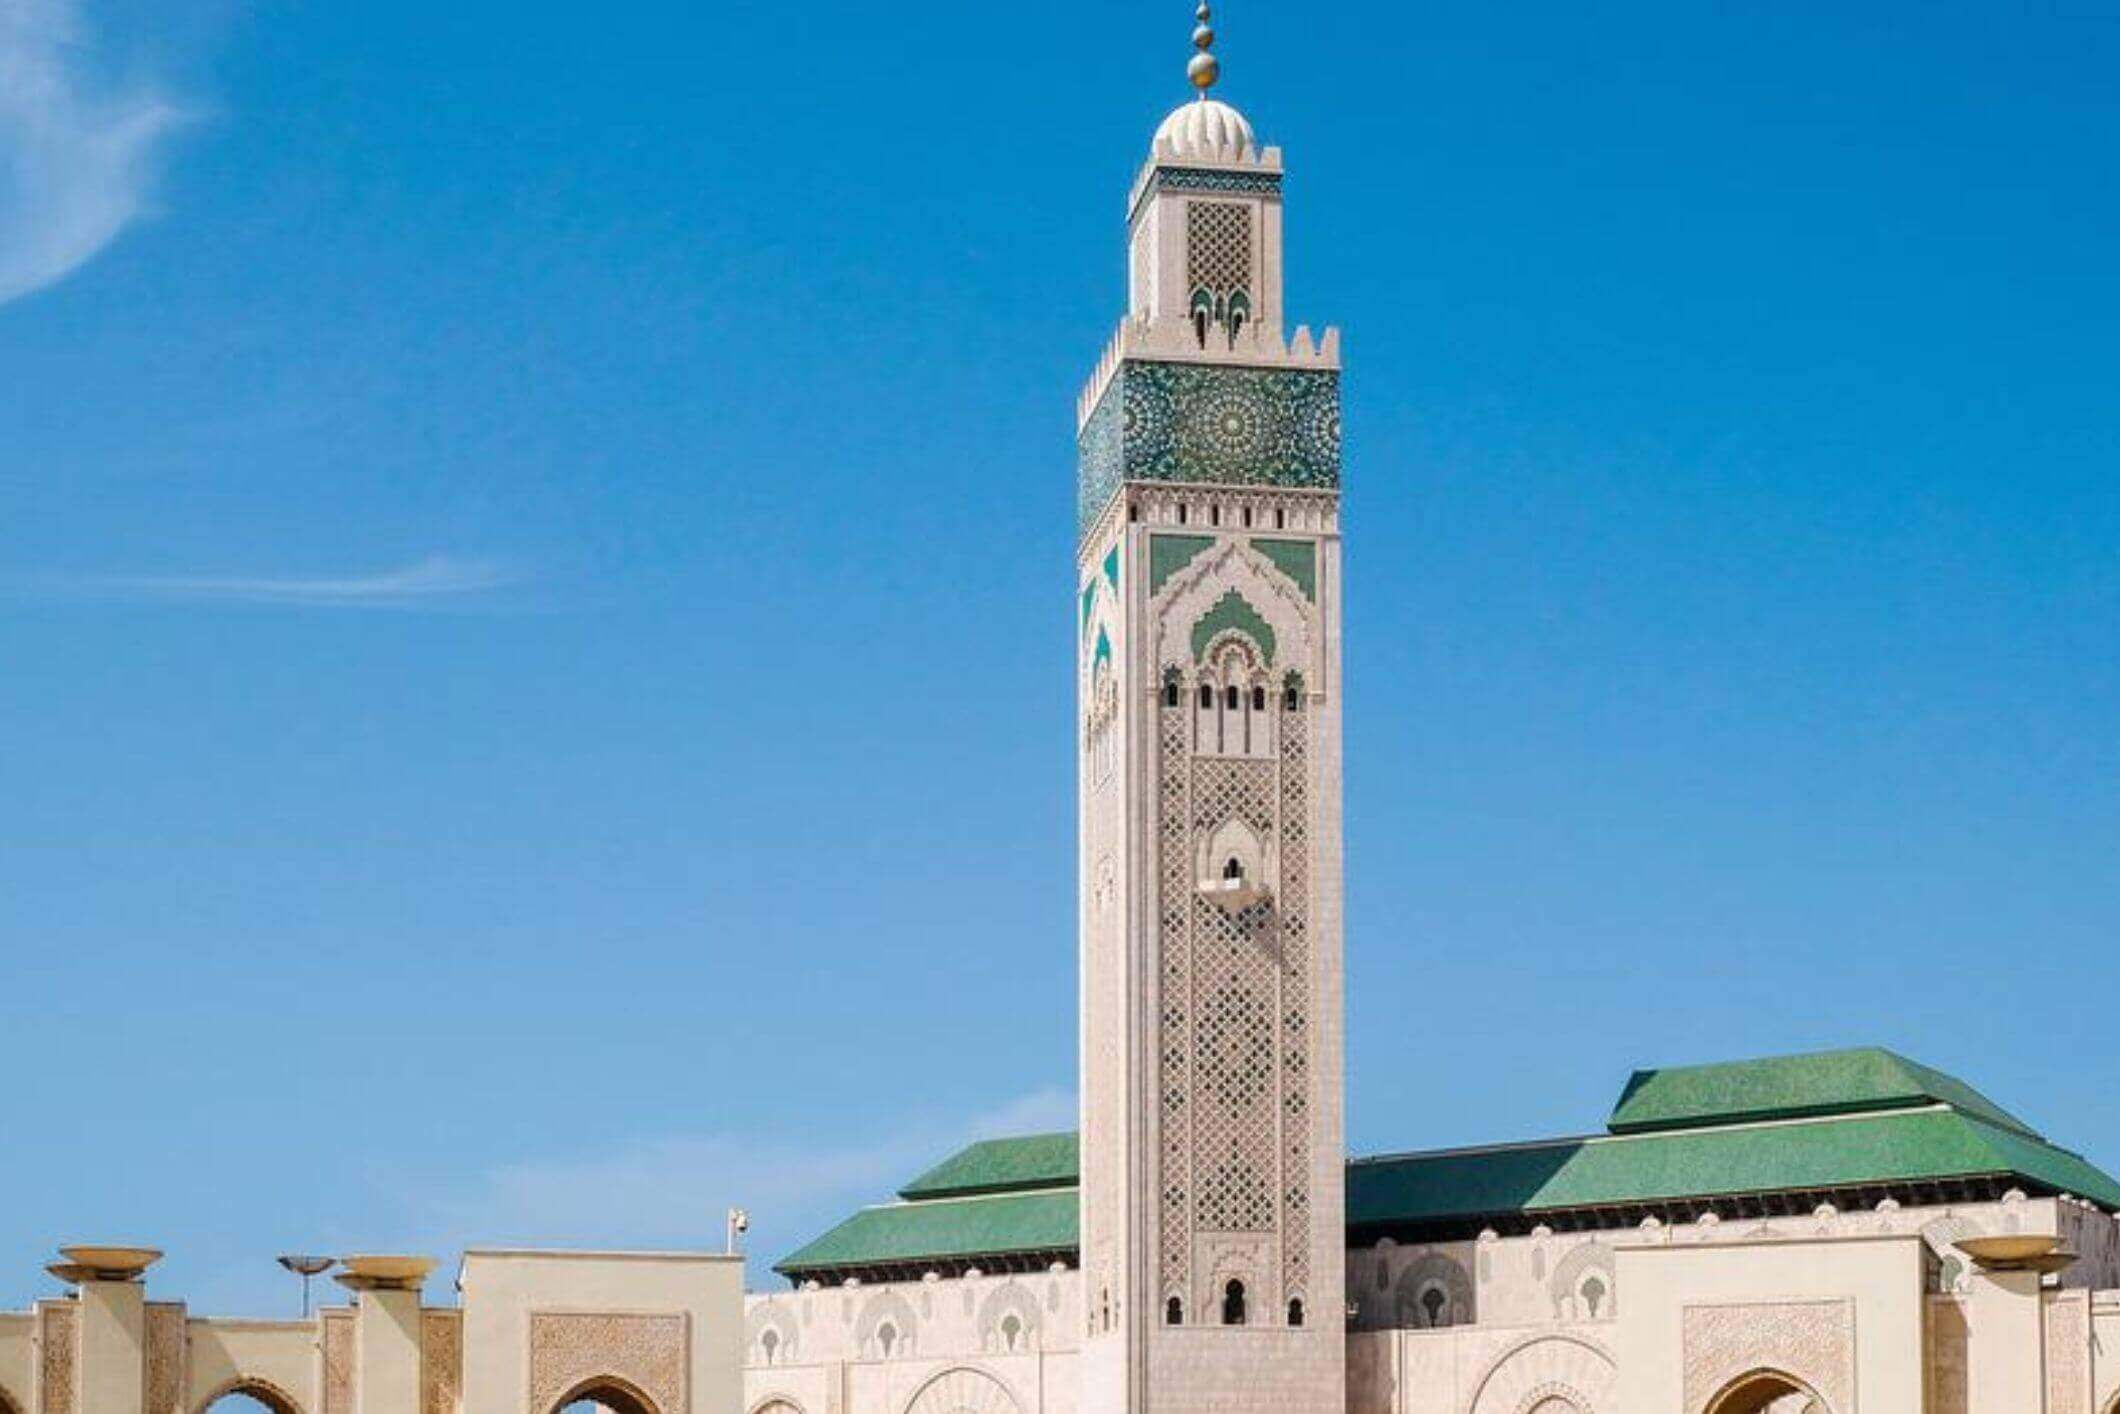 Six Mosques In Riyadh Region Will Be Restored As Part Of A Development Project